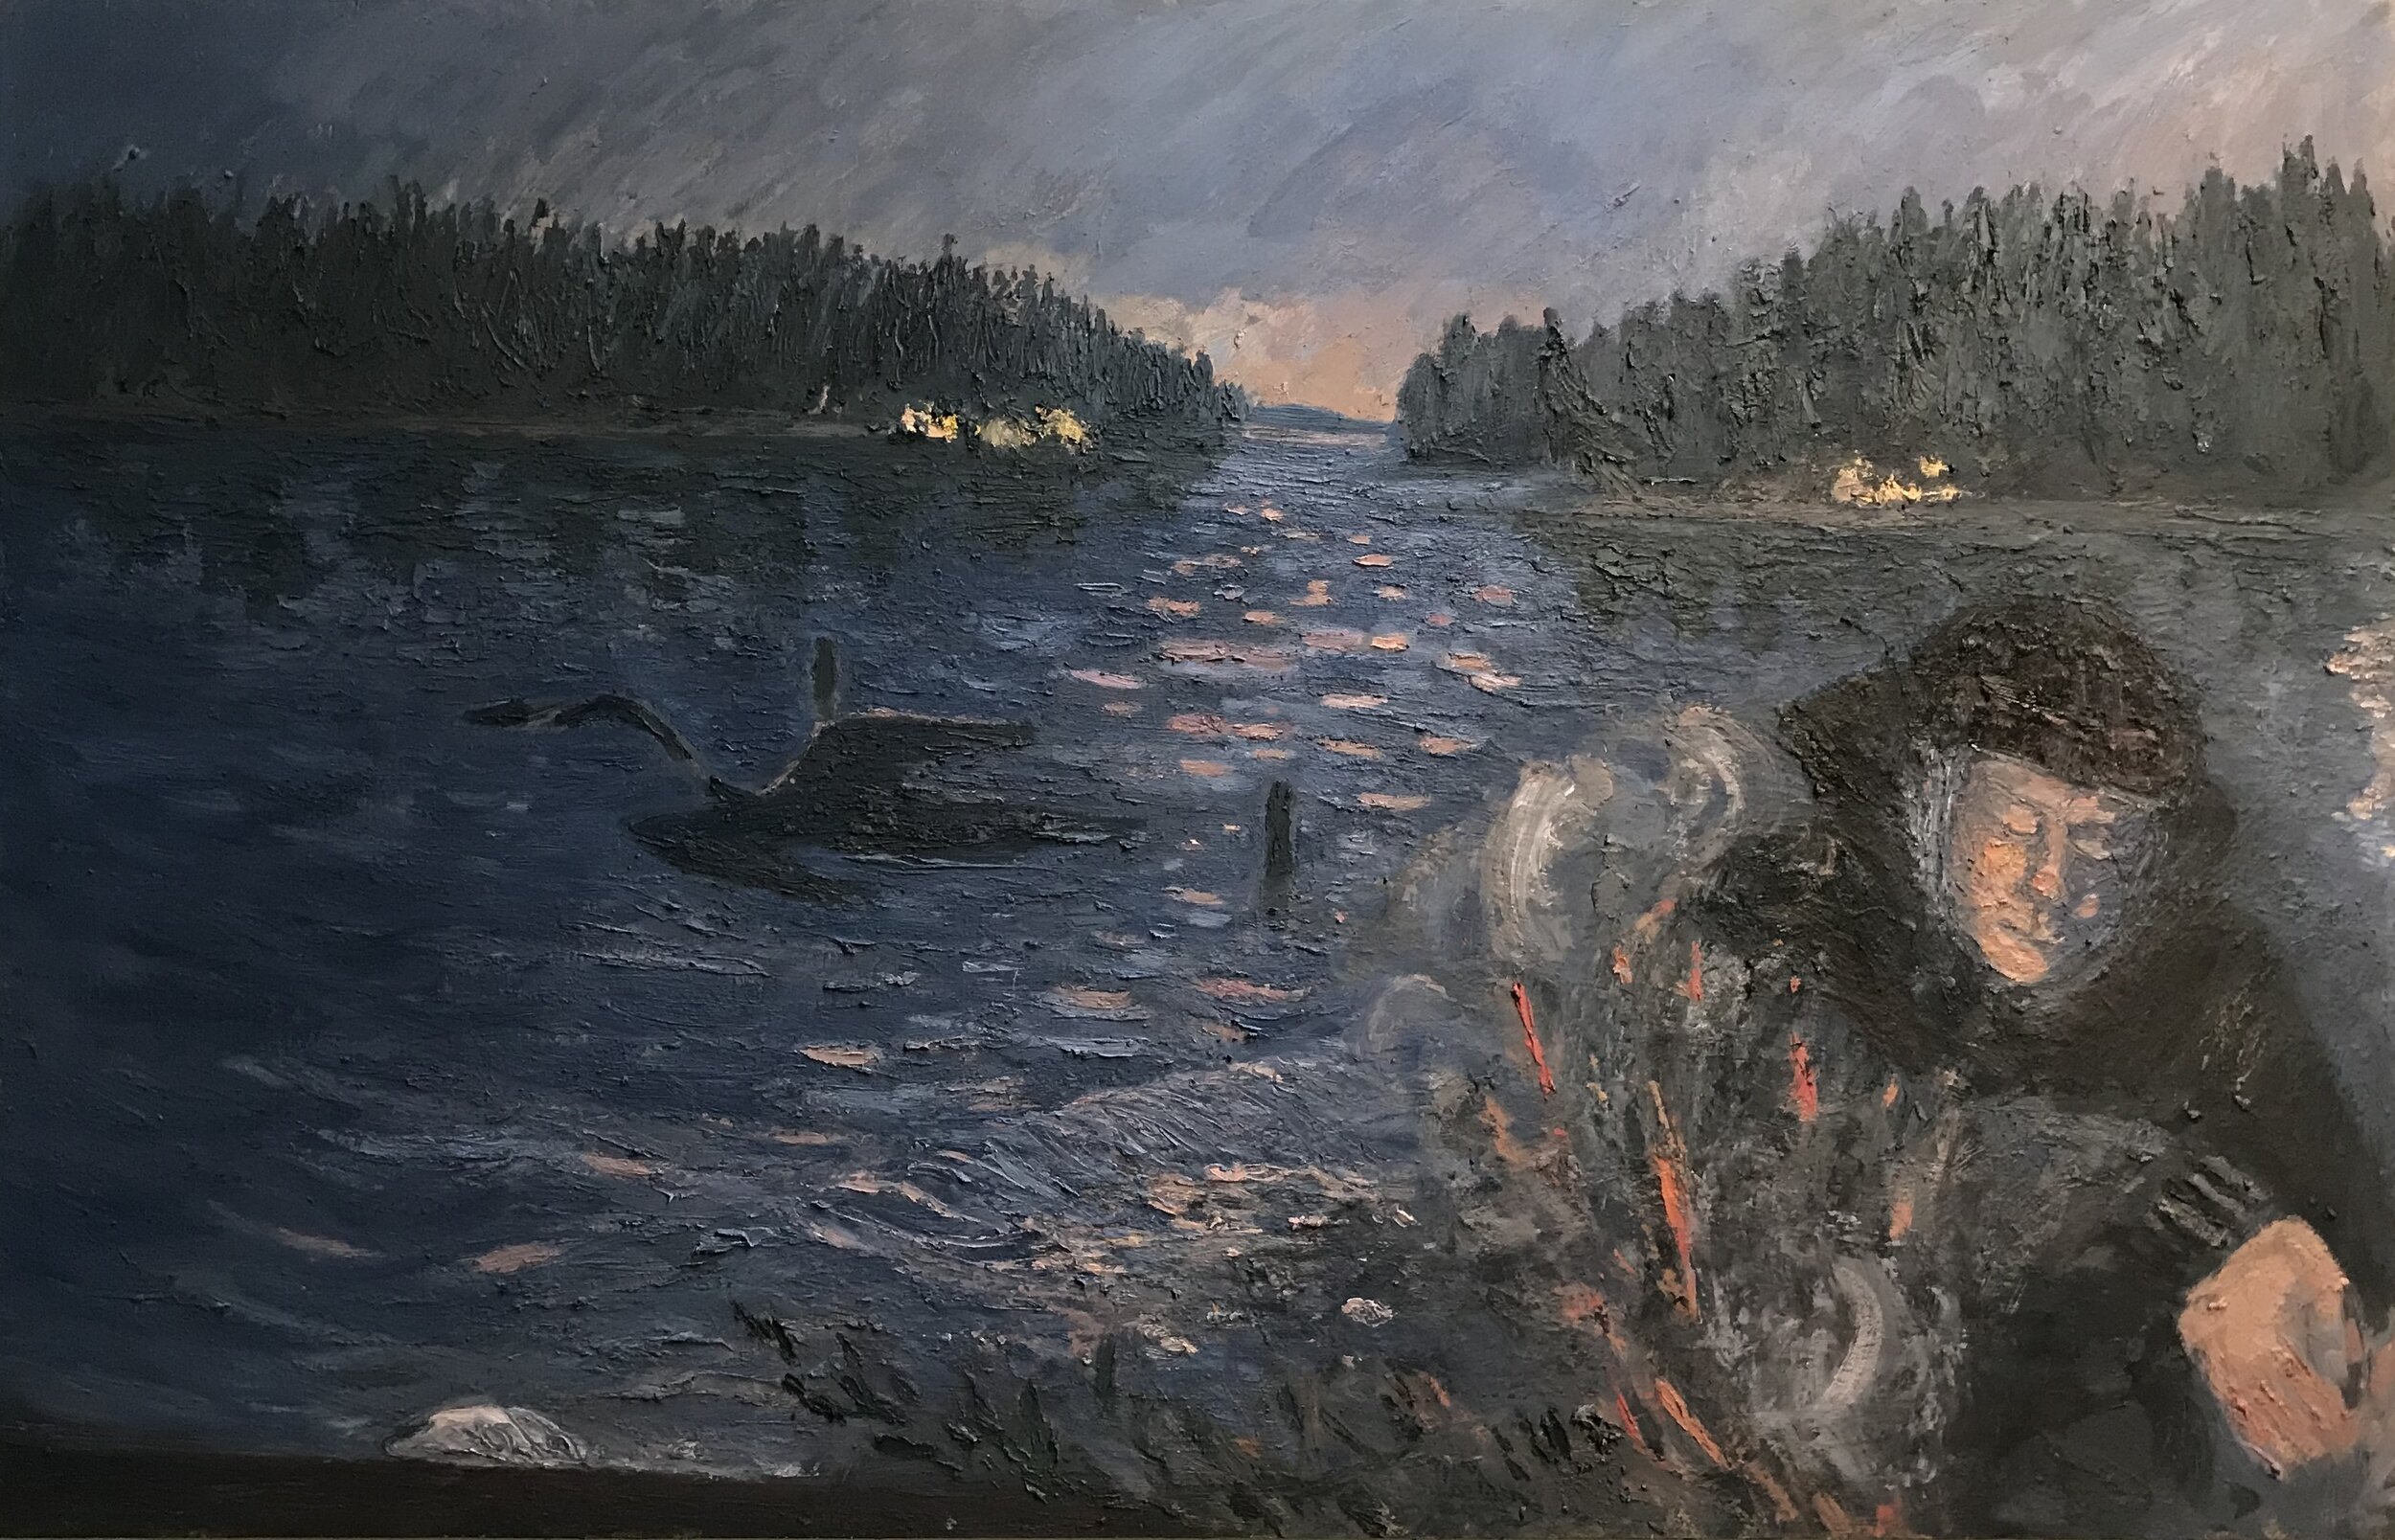 Campfire by the Sound, oil on panel, 31 x 48 in.